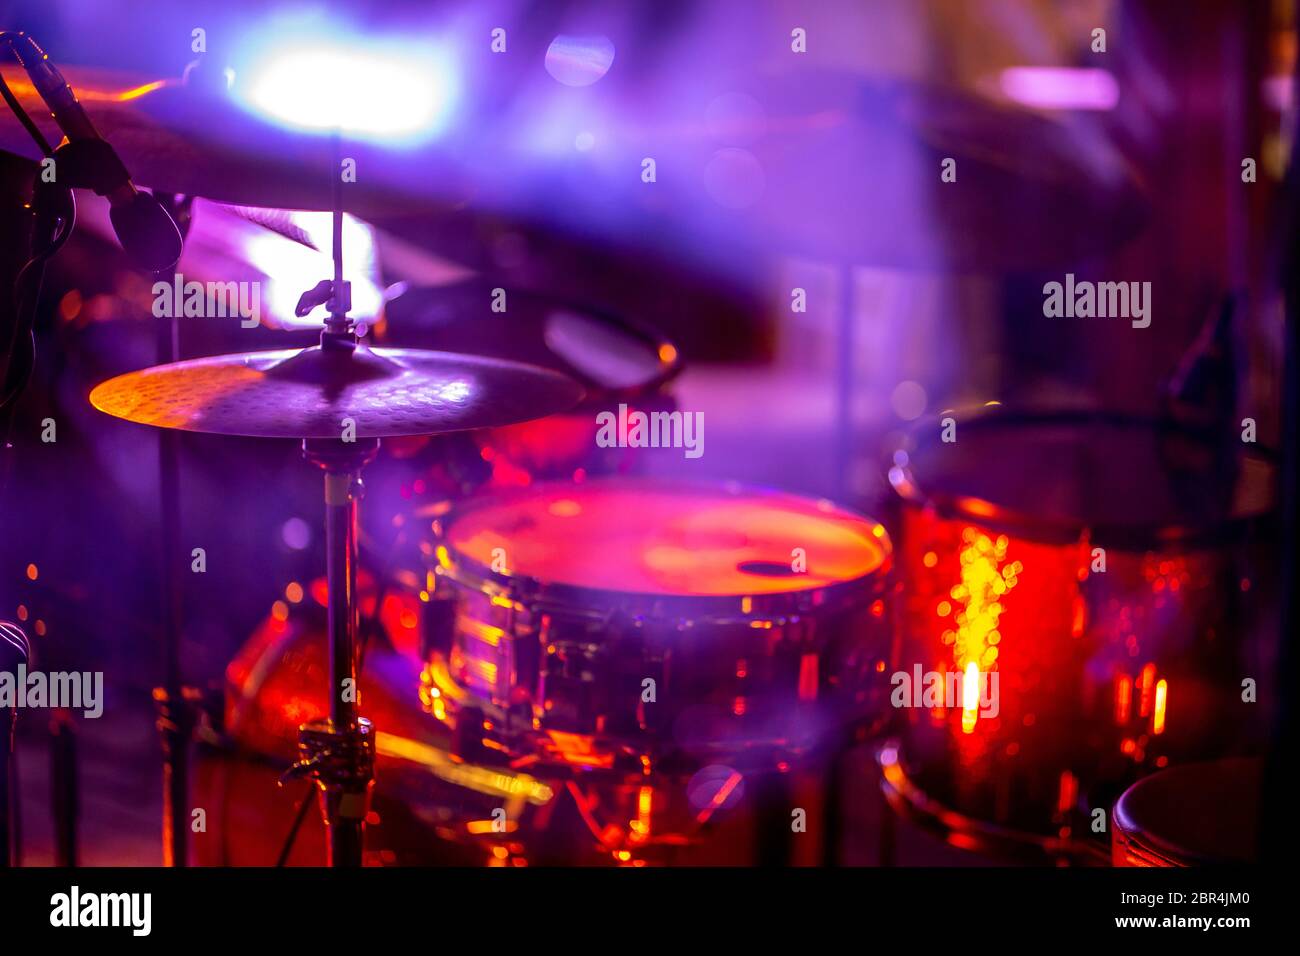 Empty abstract light illuminated stage with drumkit and microphone. Drums in multicolored light during celebrations on stage. Stock Photo